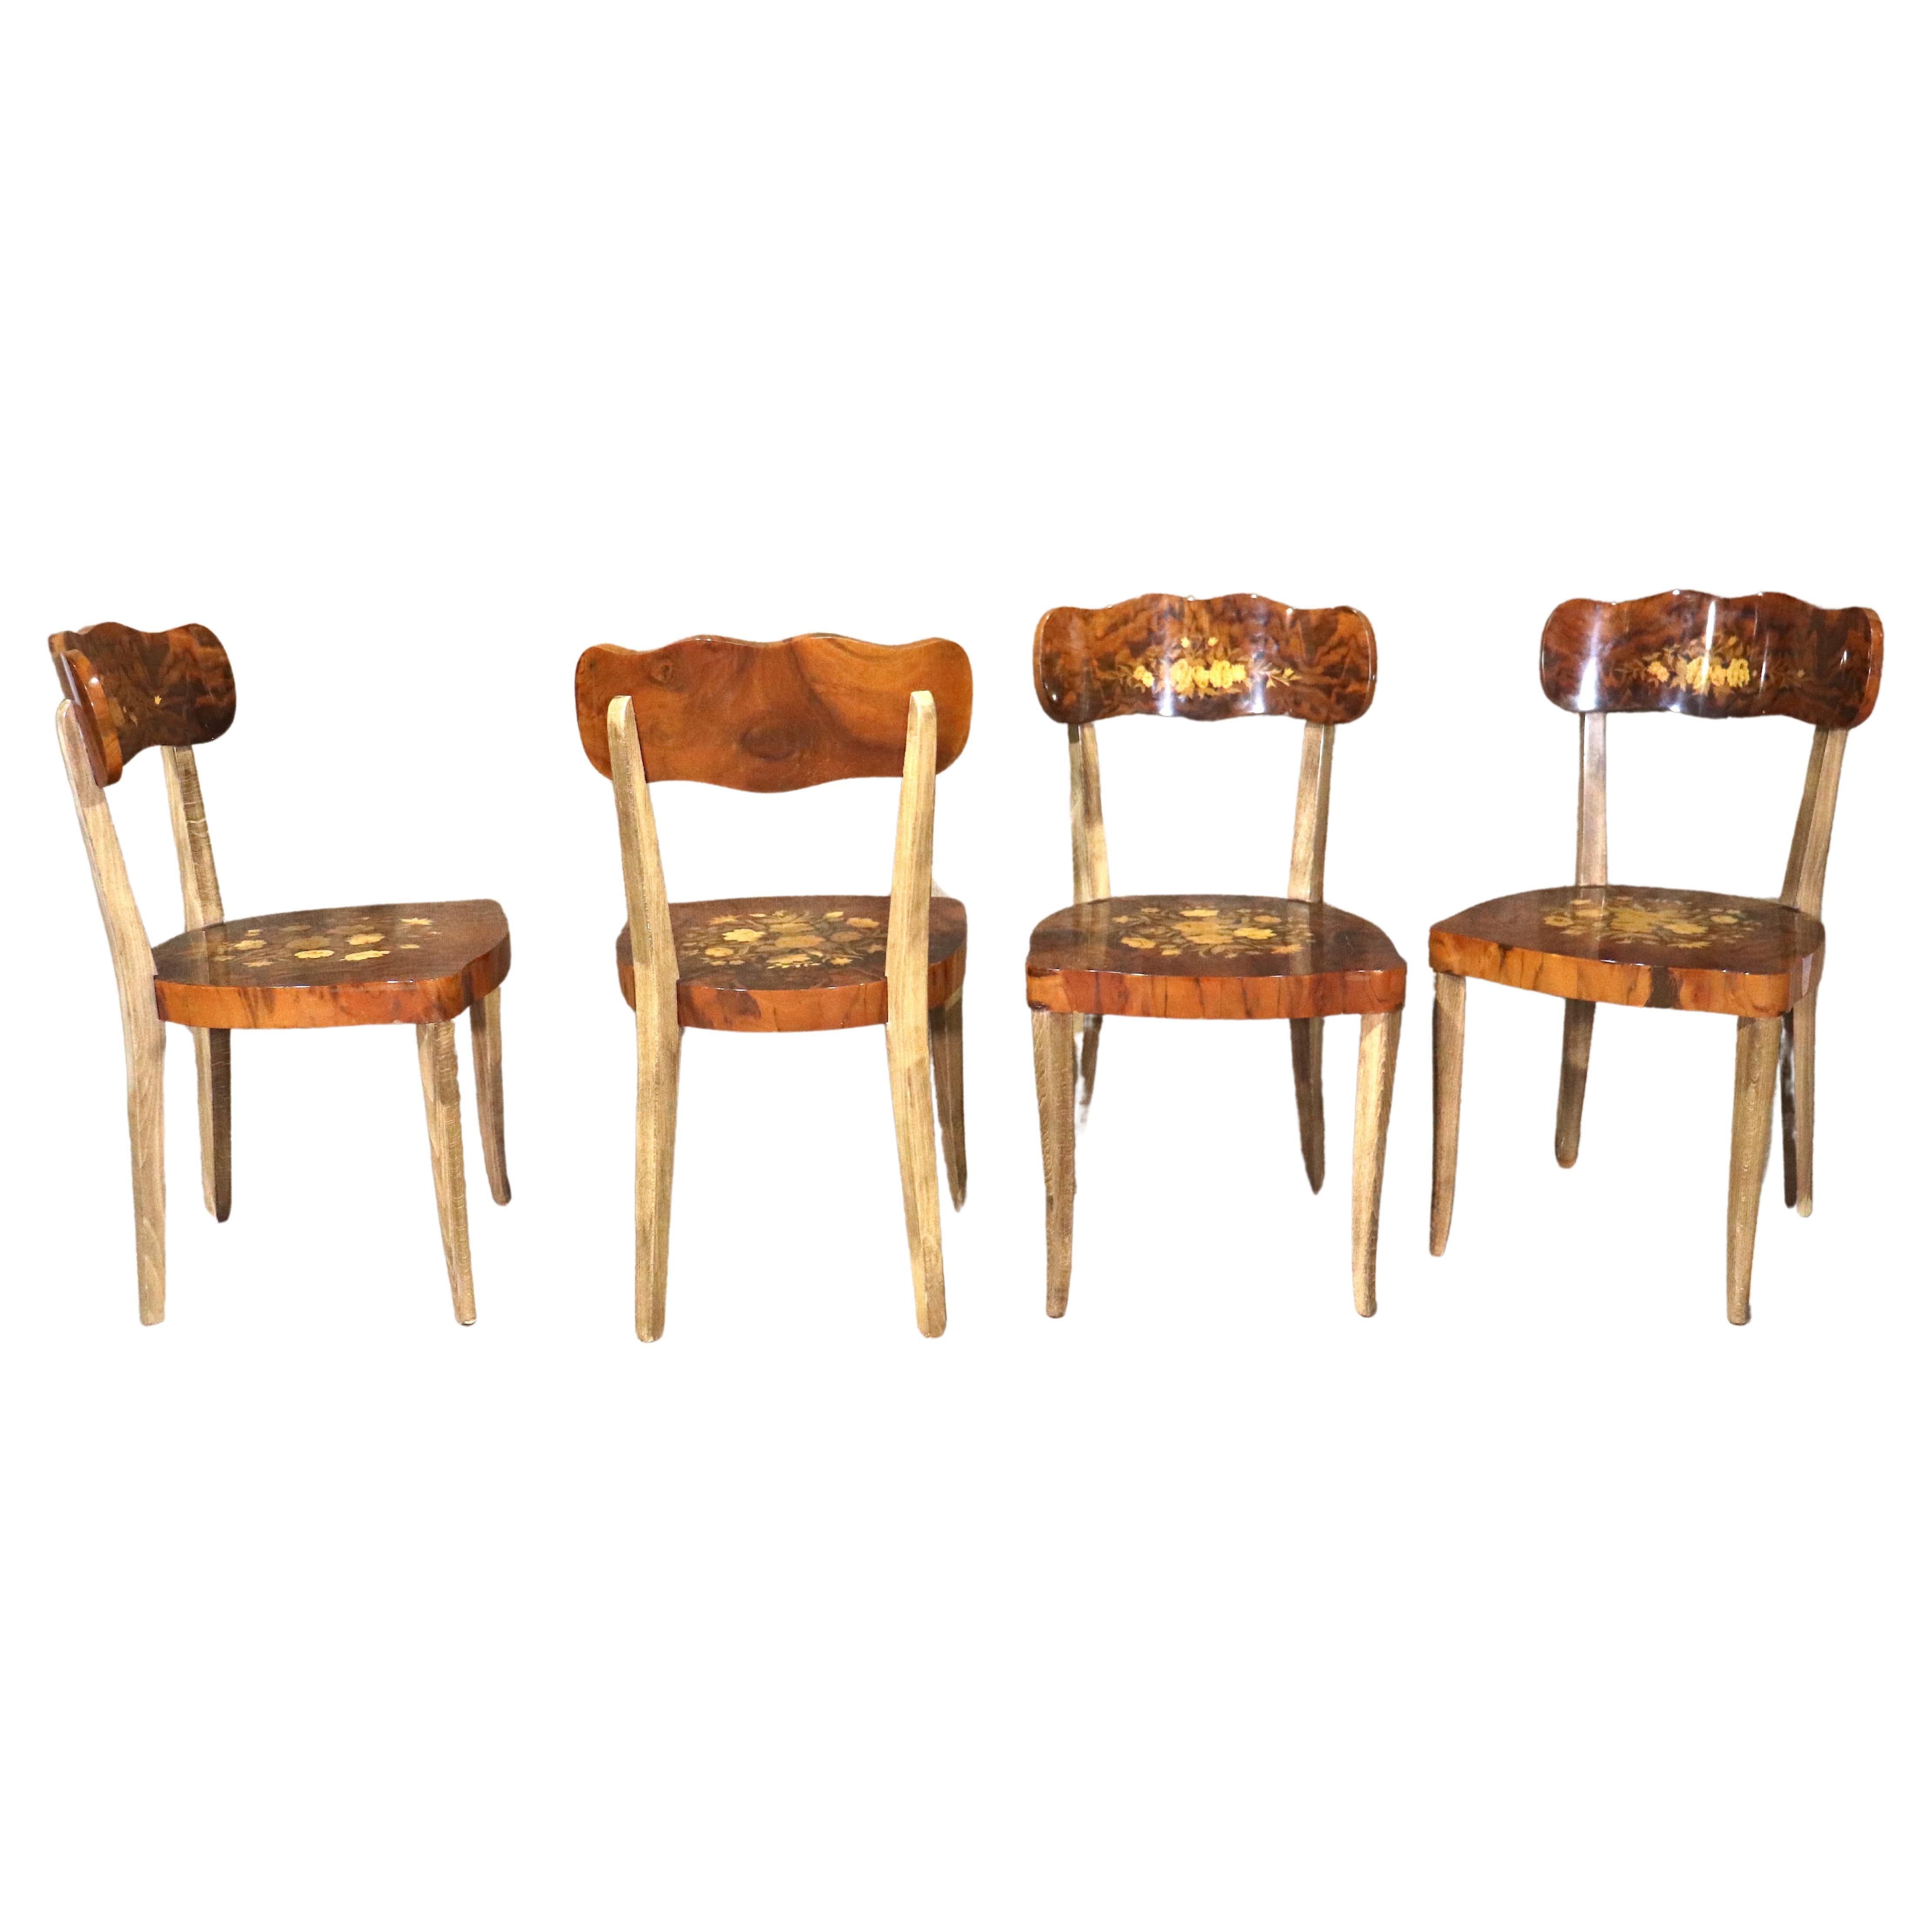 Notturno Intarsio Italian Marquetry Chairs For Sale